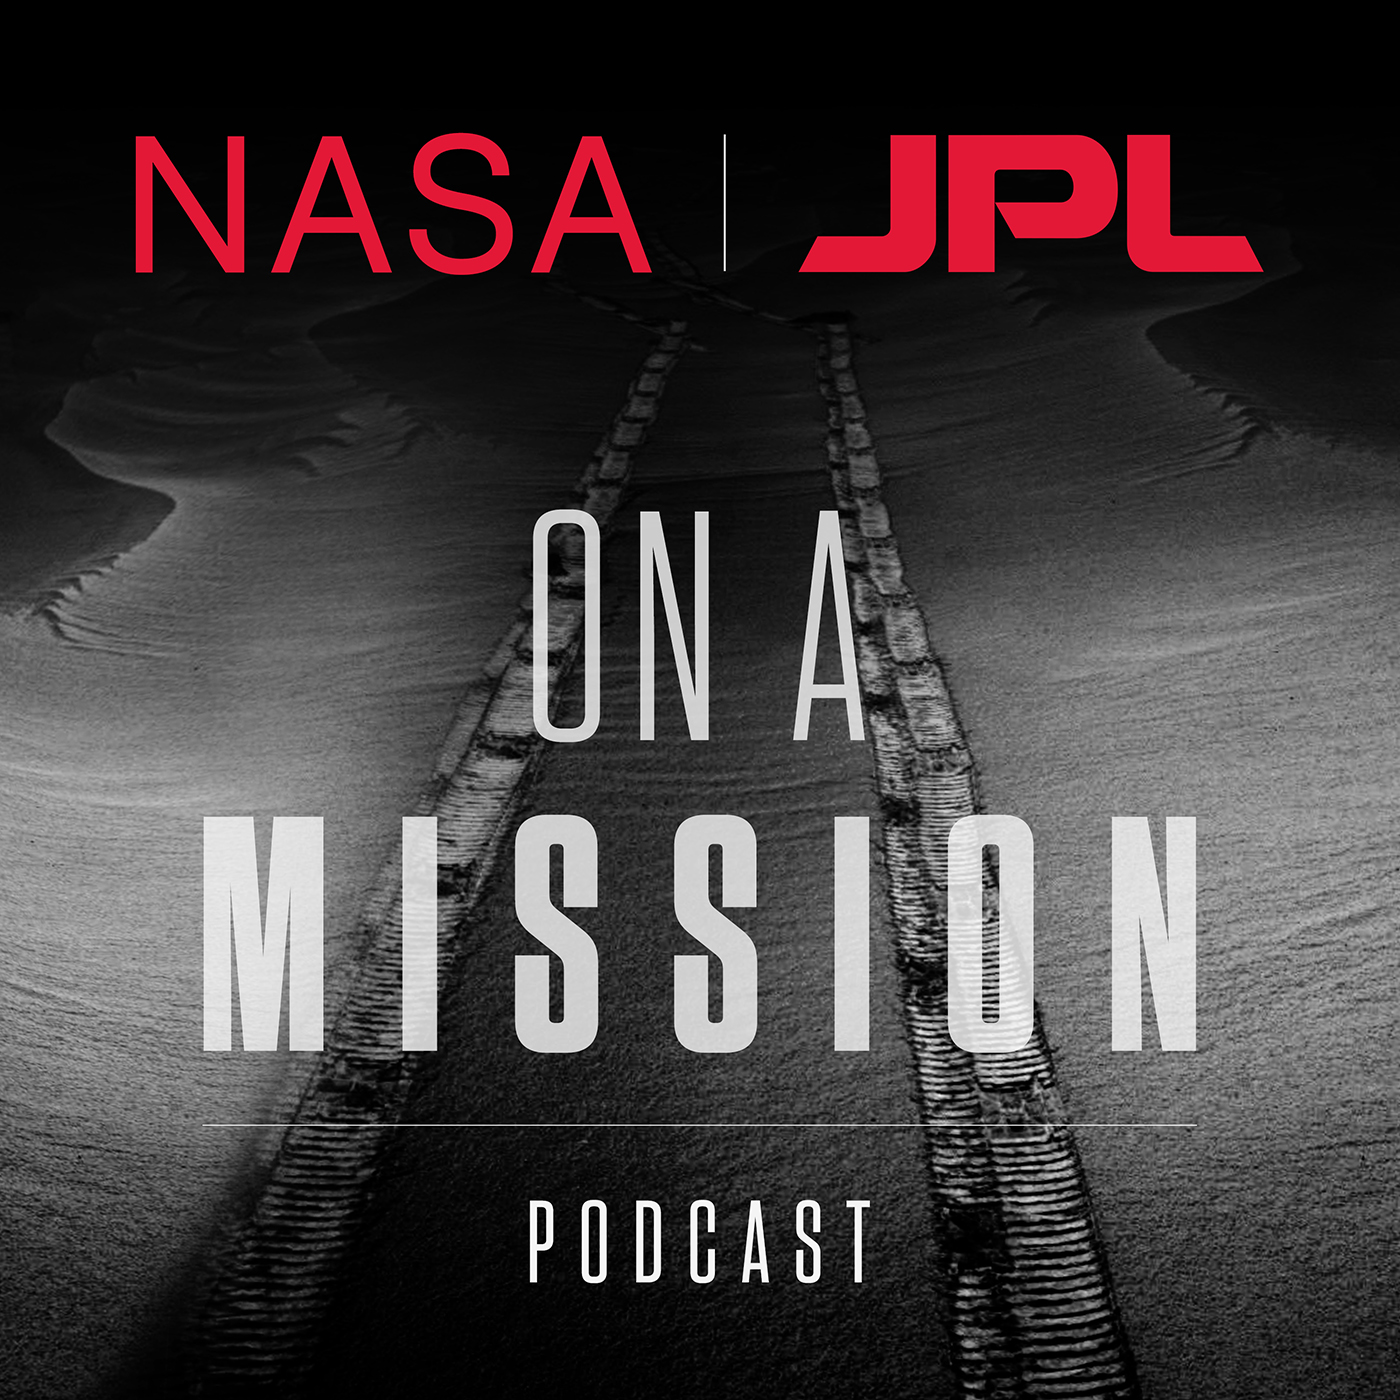 On a Mission podcast cover image of tracks on Mars with NASA JPL title text